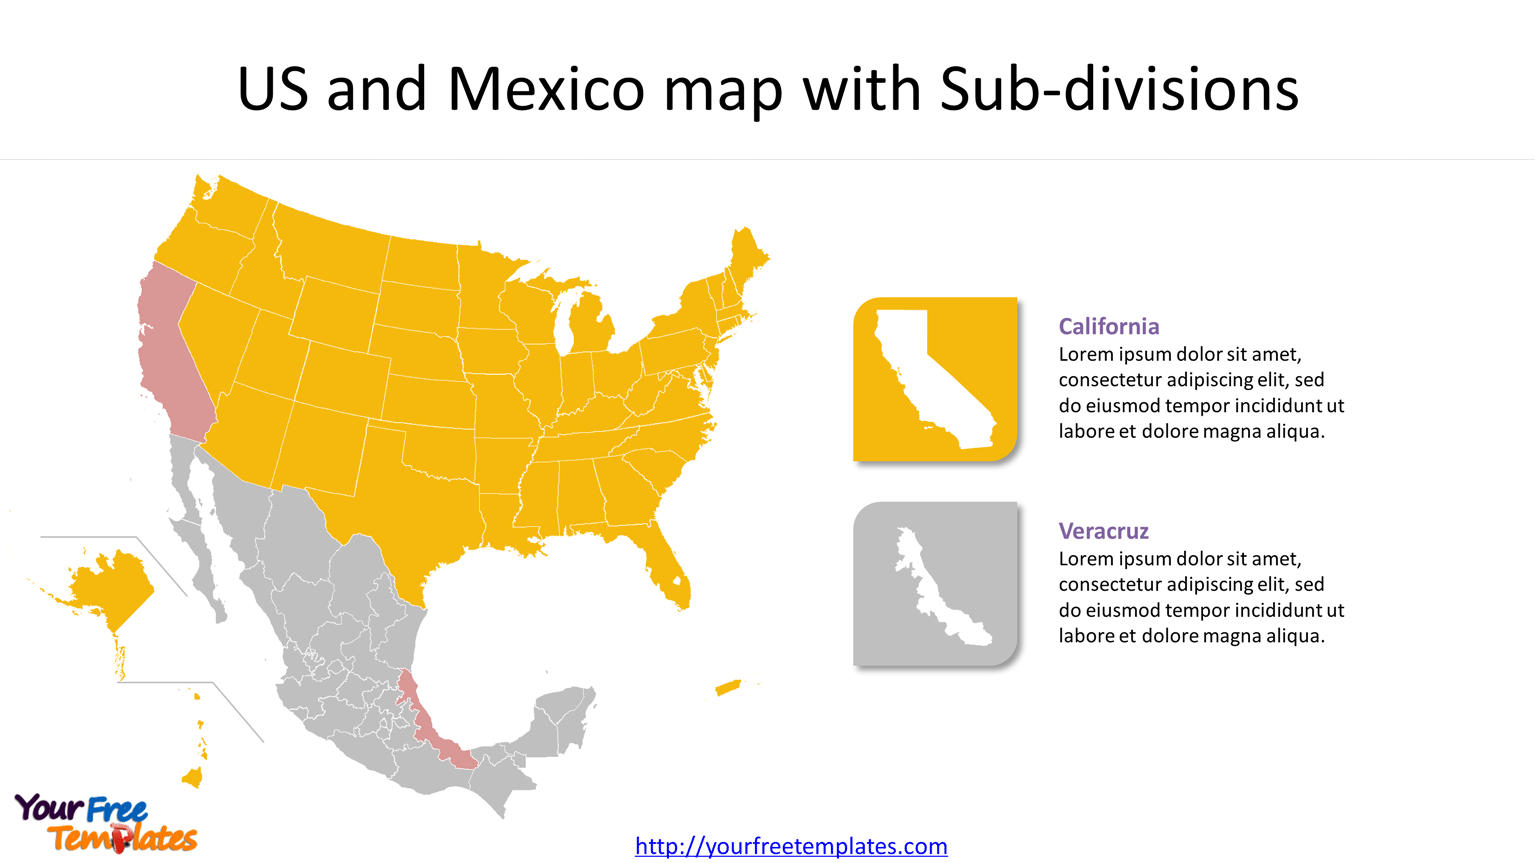 US and Mexico Map of Outline